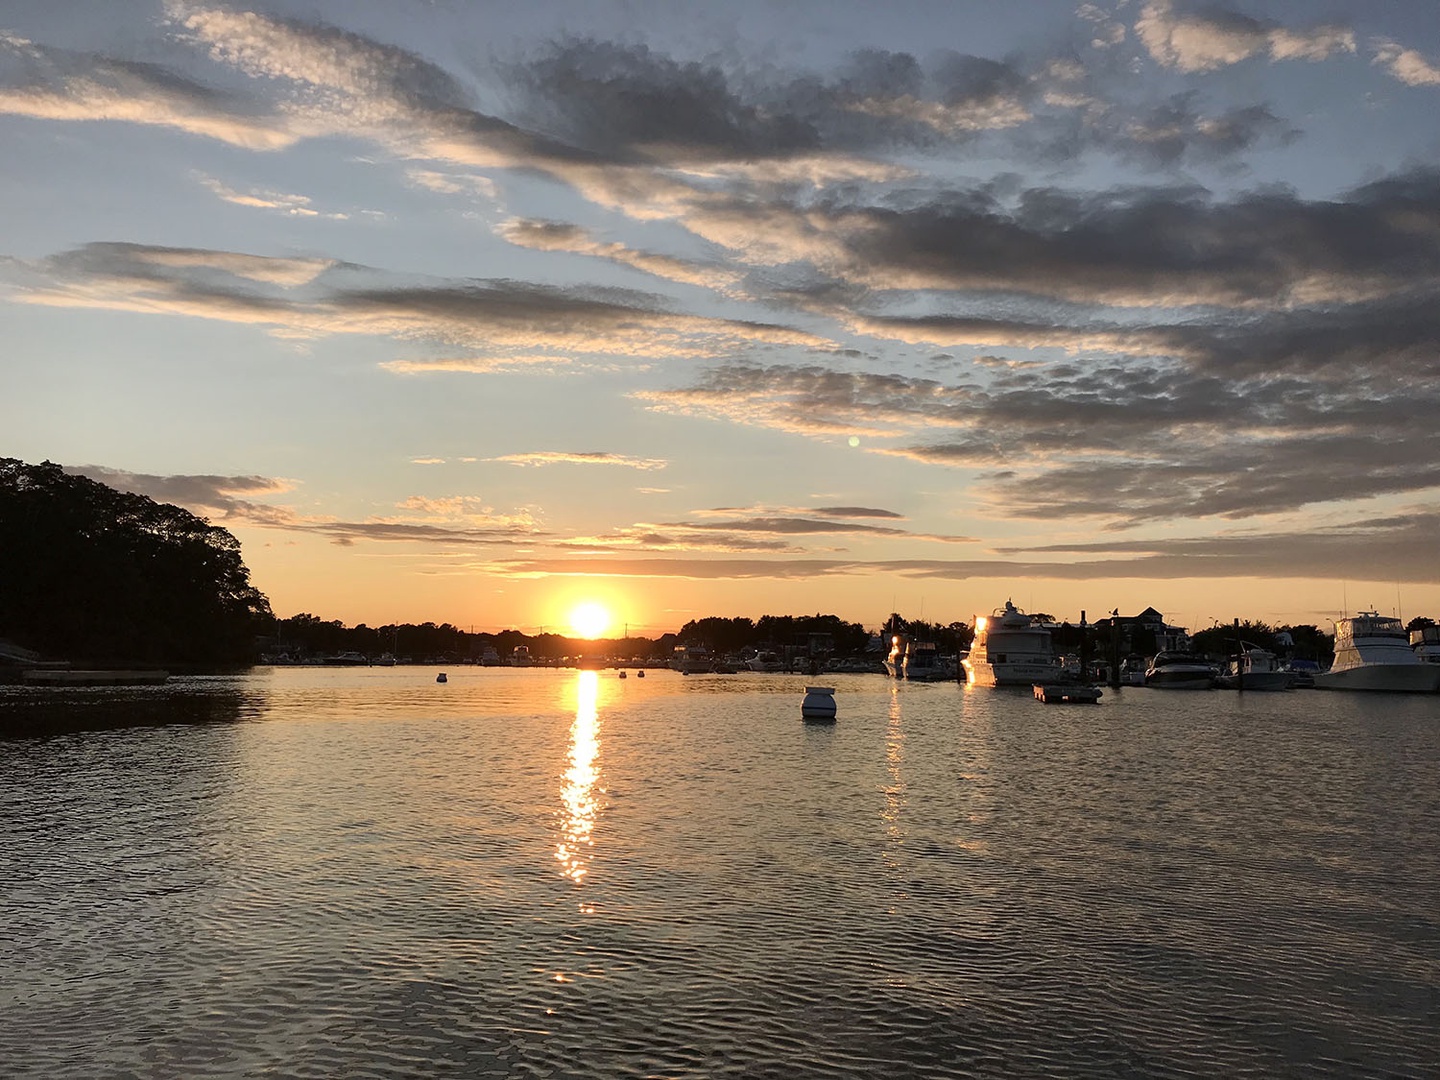 Soak up the beautiful views of the sunsets over Danvers River.